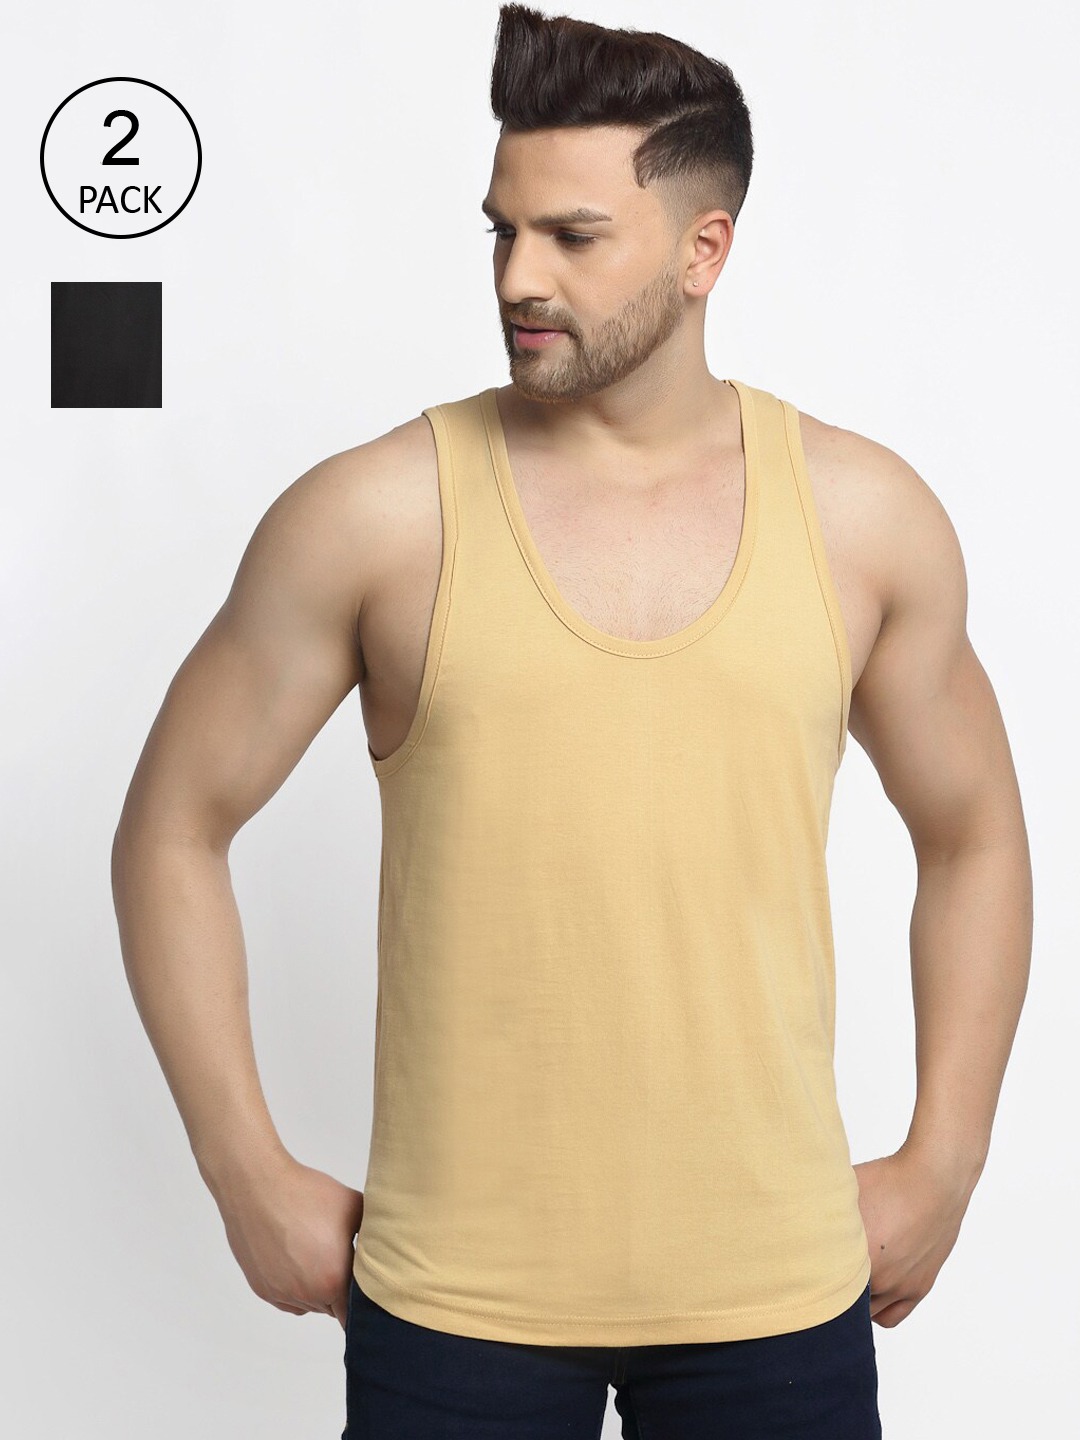 Clothing Innerwear Vests | Friskers Men Pack Of 2 Solid Pure Cotton Innerwear Gym Vests - UU48909